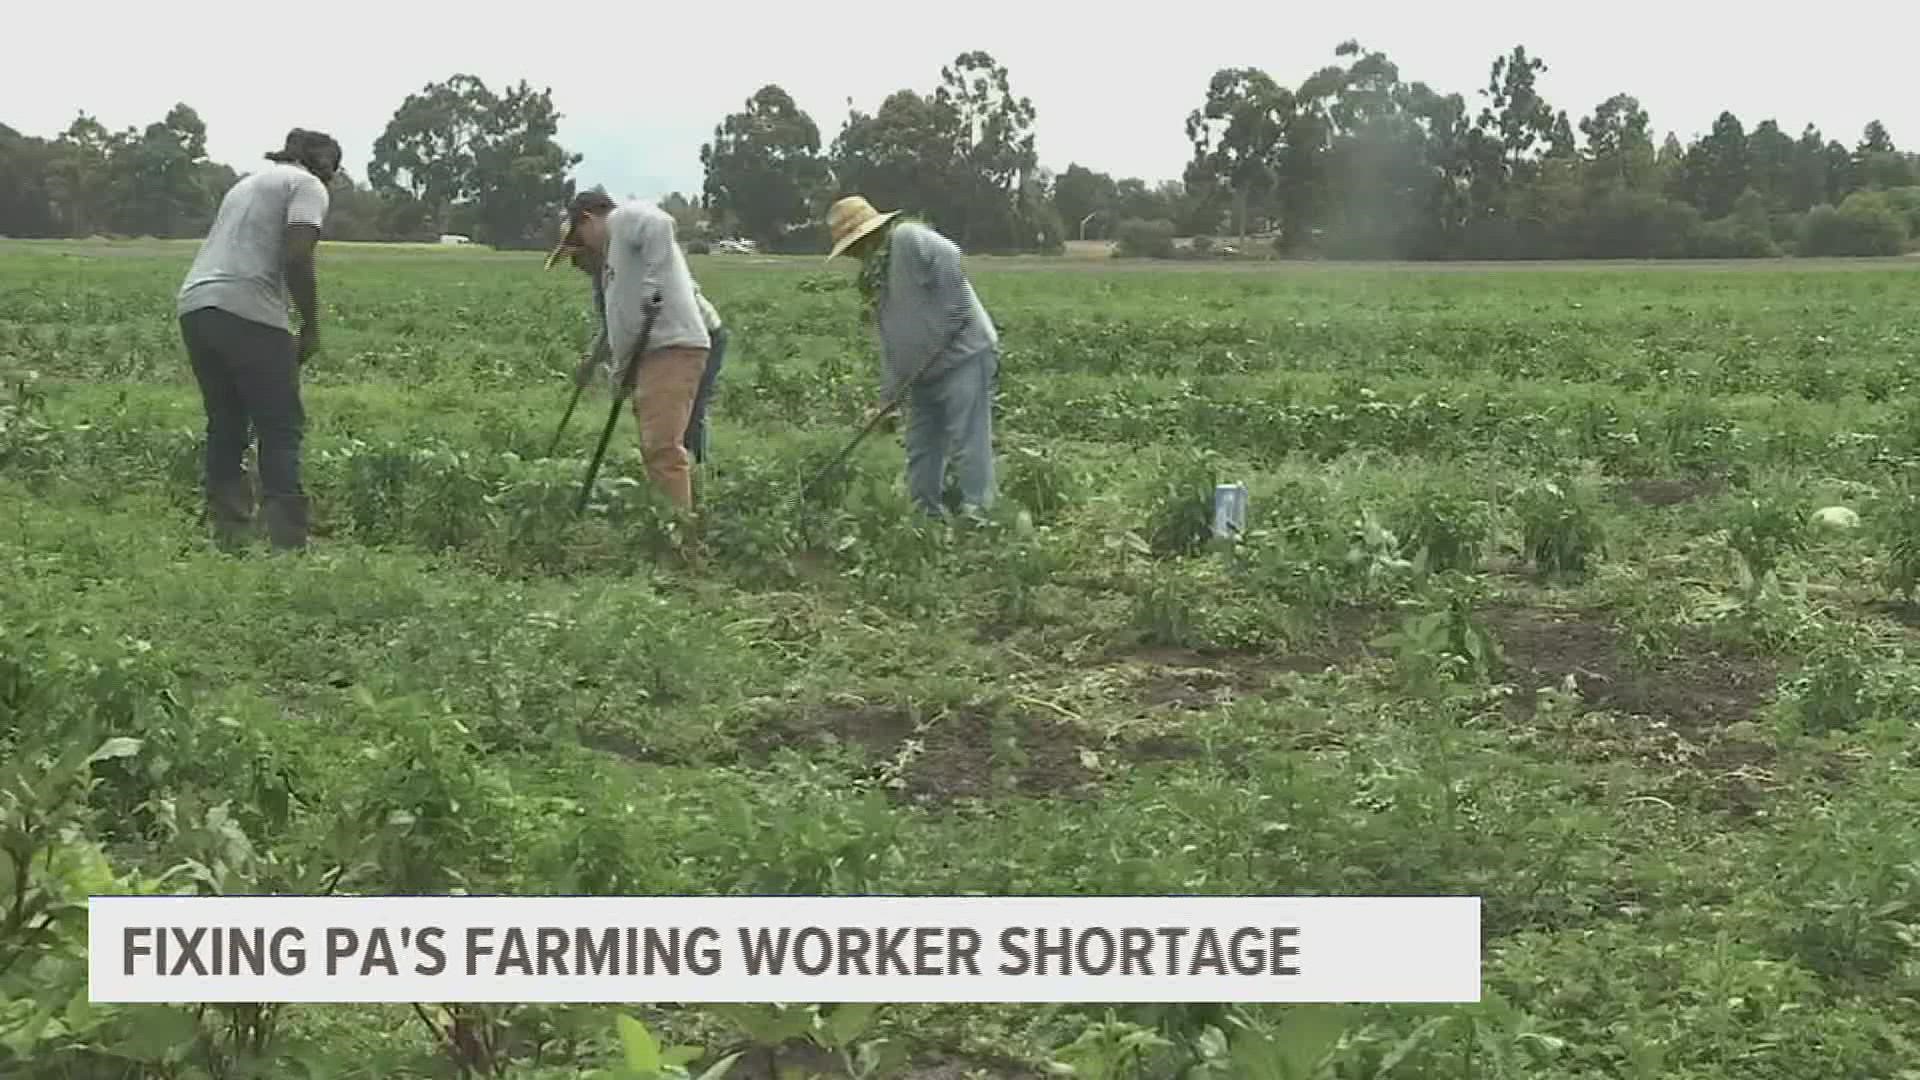 As families across America feel the impact of inflation at the grocery store, the agriculture industry is feeling the pinch of a labor shortage.